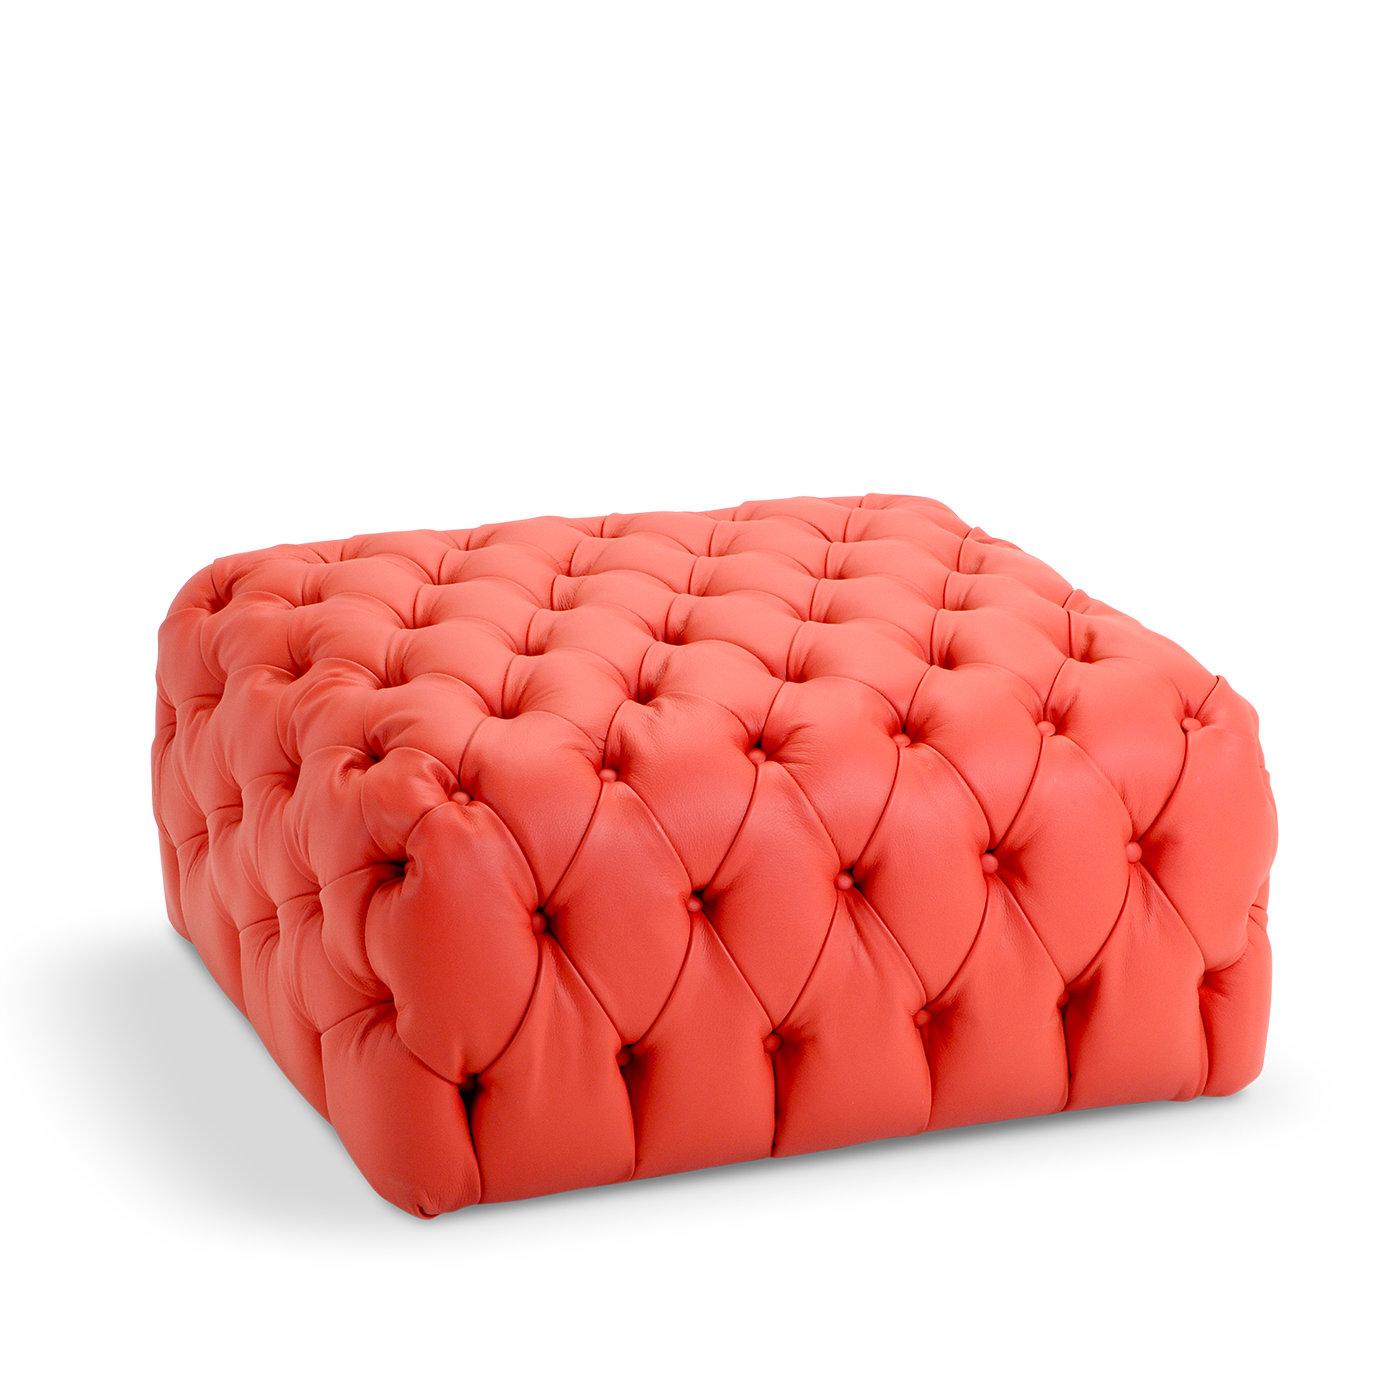 Exuding elegance and comfort, this pouf makes a glamorous statement piece in a classic-styled living room, lounge, or walk-in closet. The plywood and fir frame, padded in multi-density polyurethane foam, is covered with vibrant orange dacron with